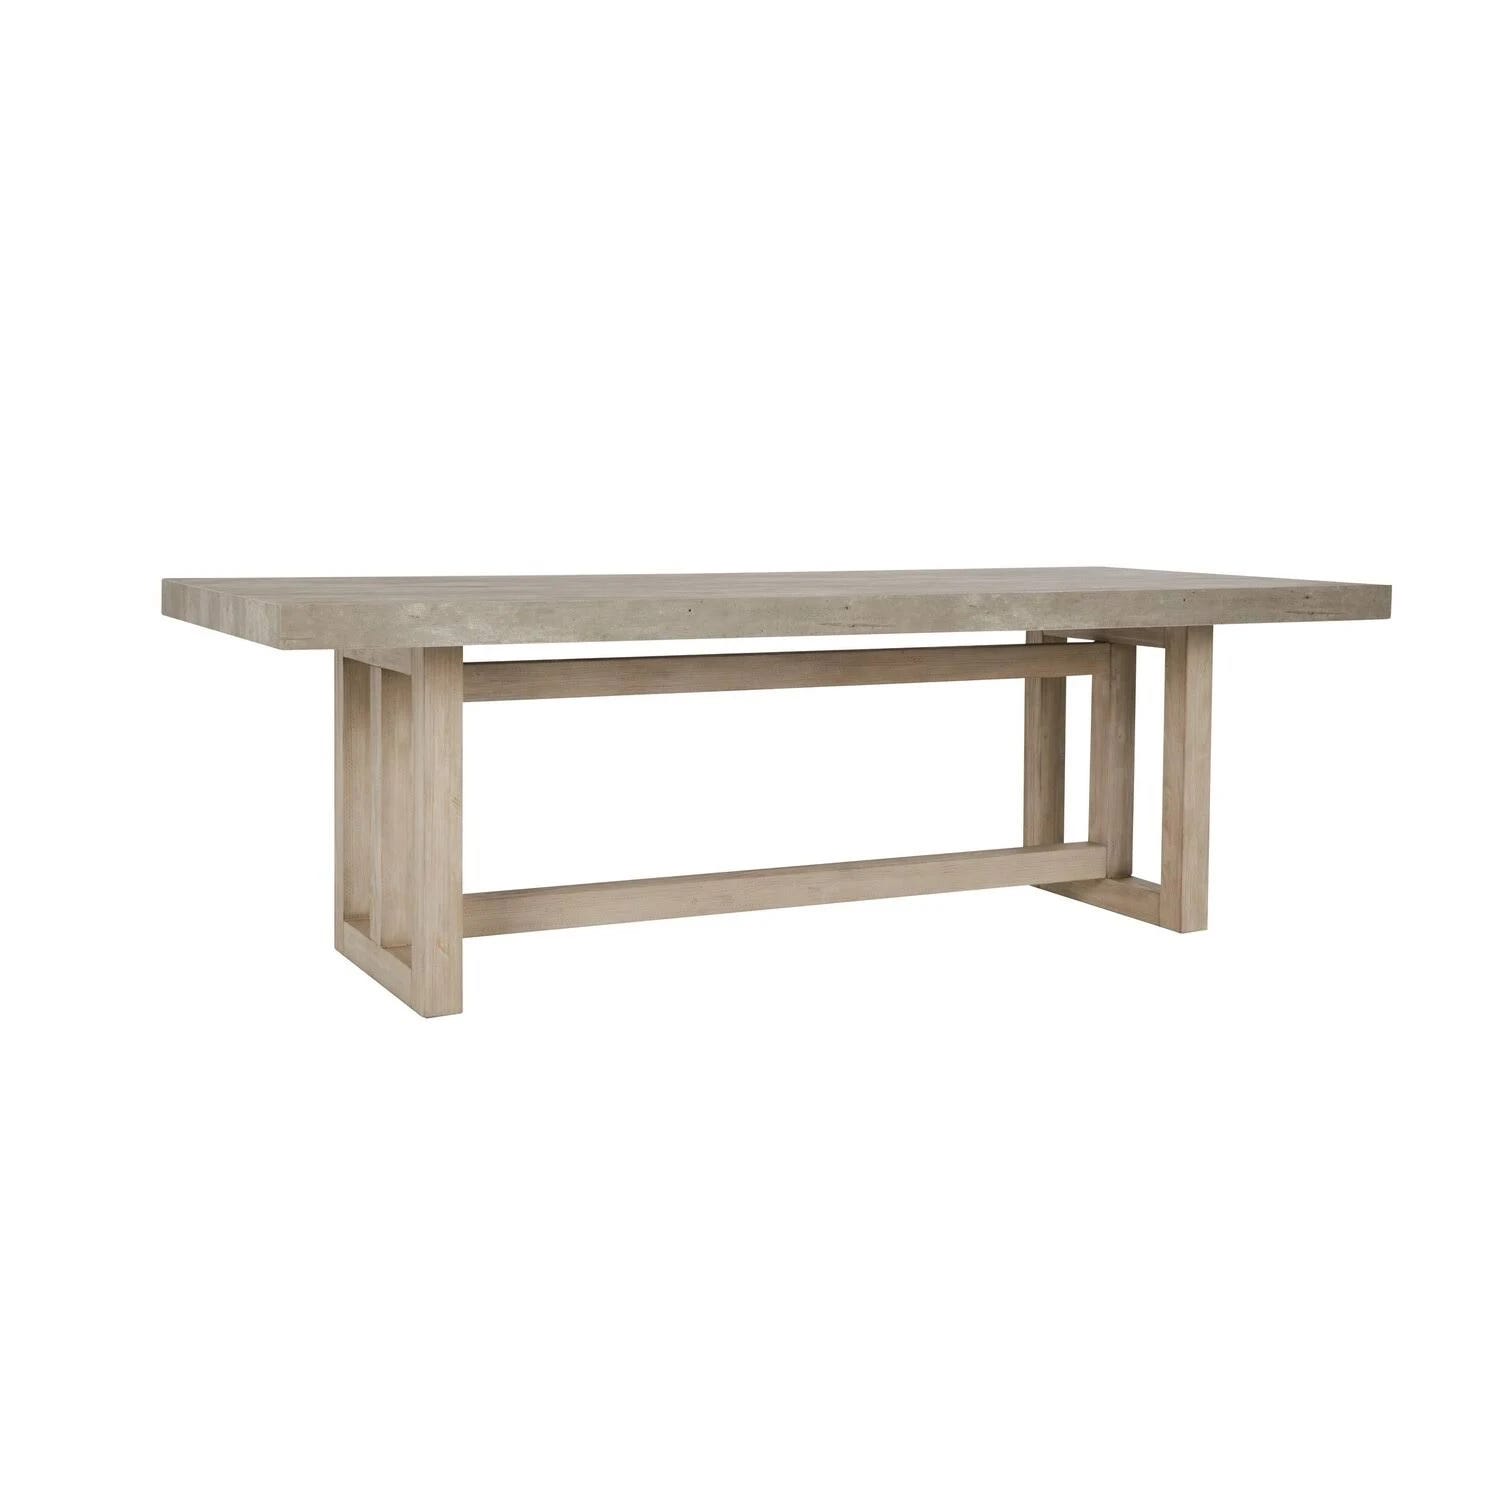 Reclaimed Pine Concrete Dining Table with Lily White and Gray Finish | Image